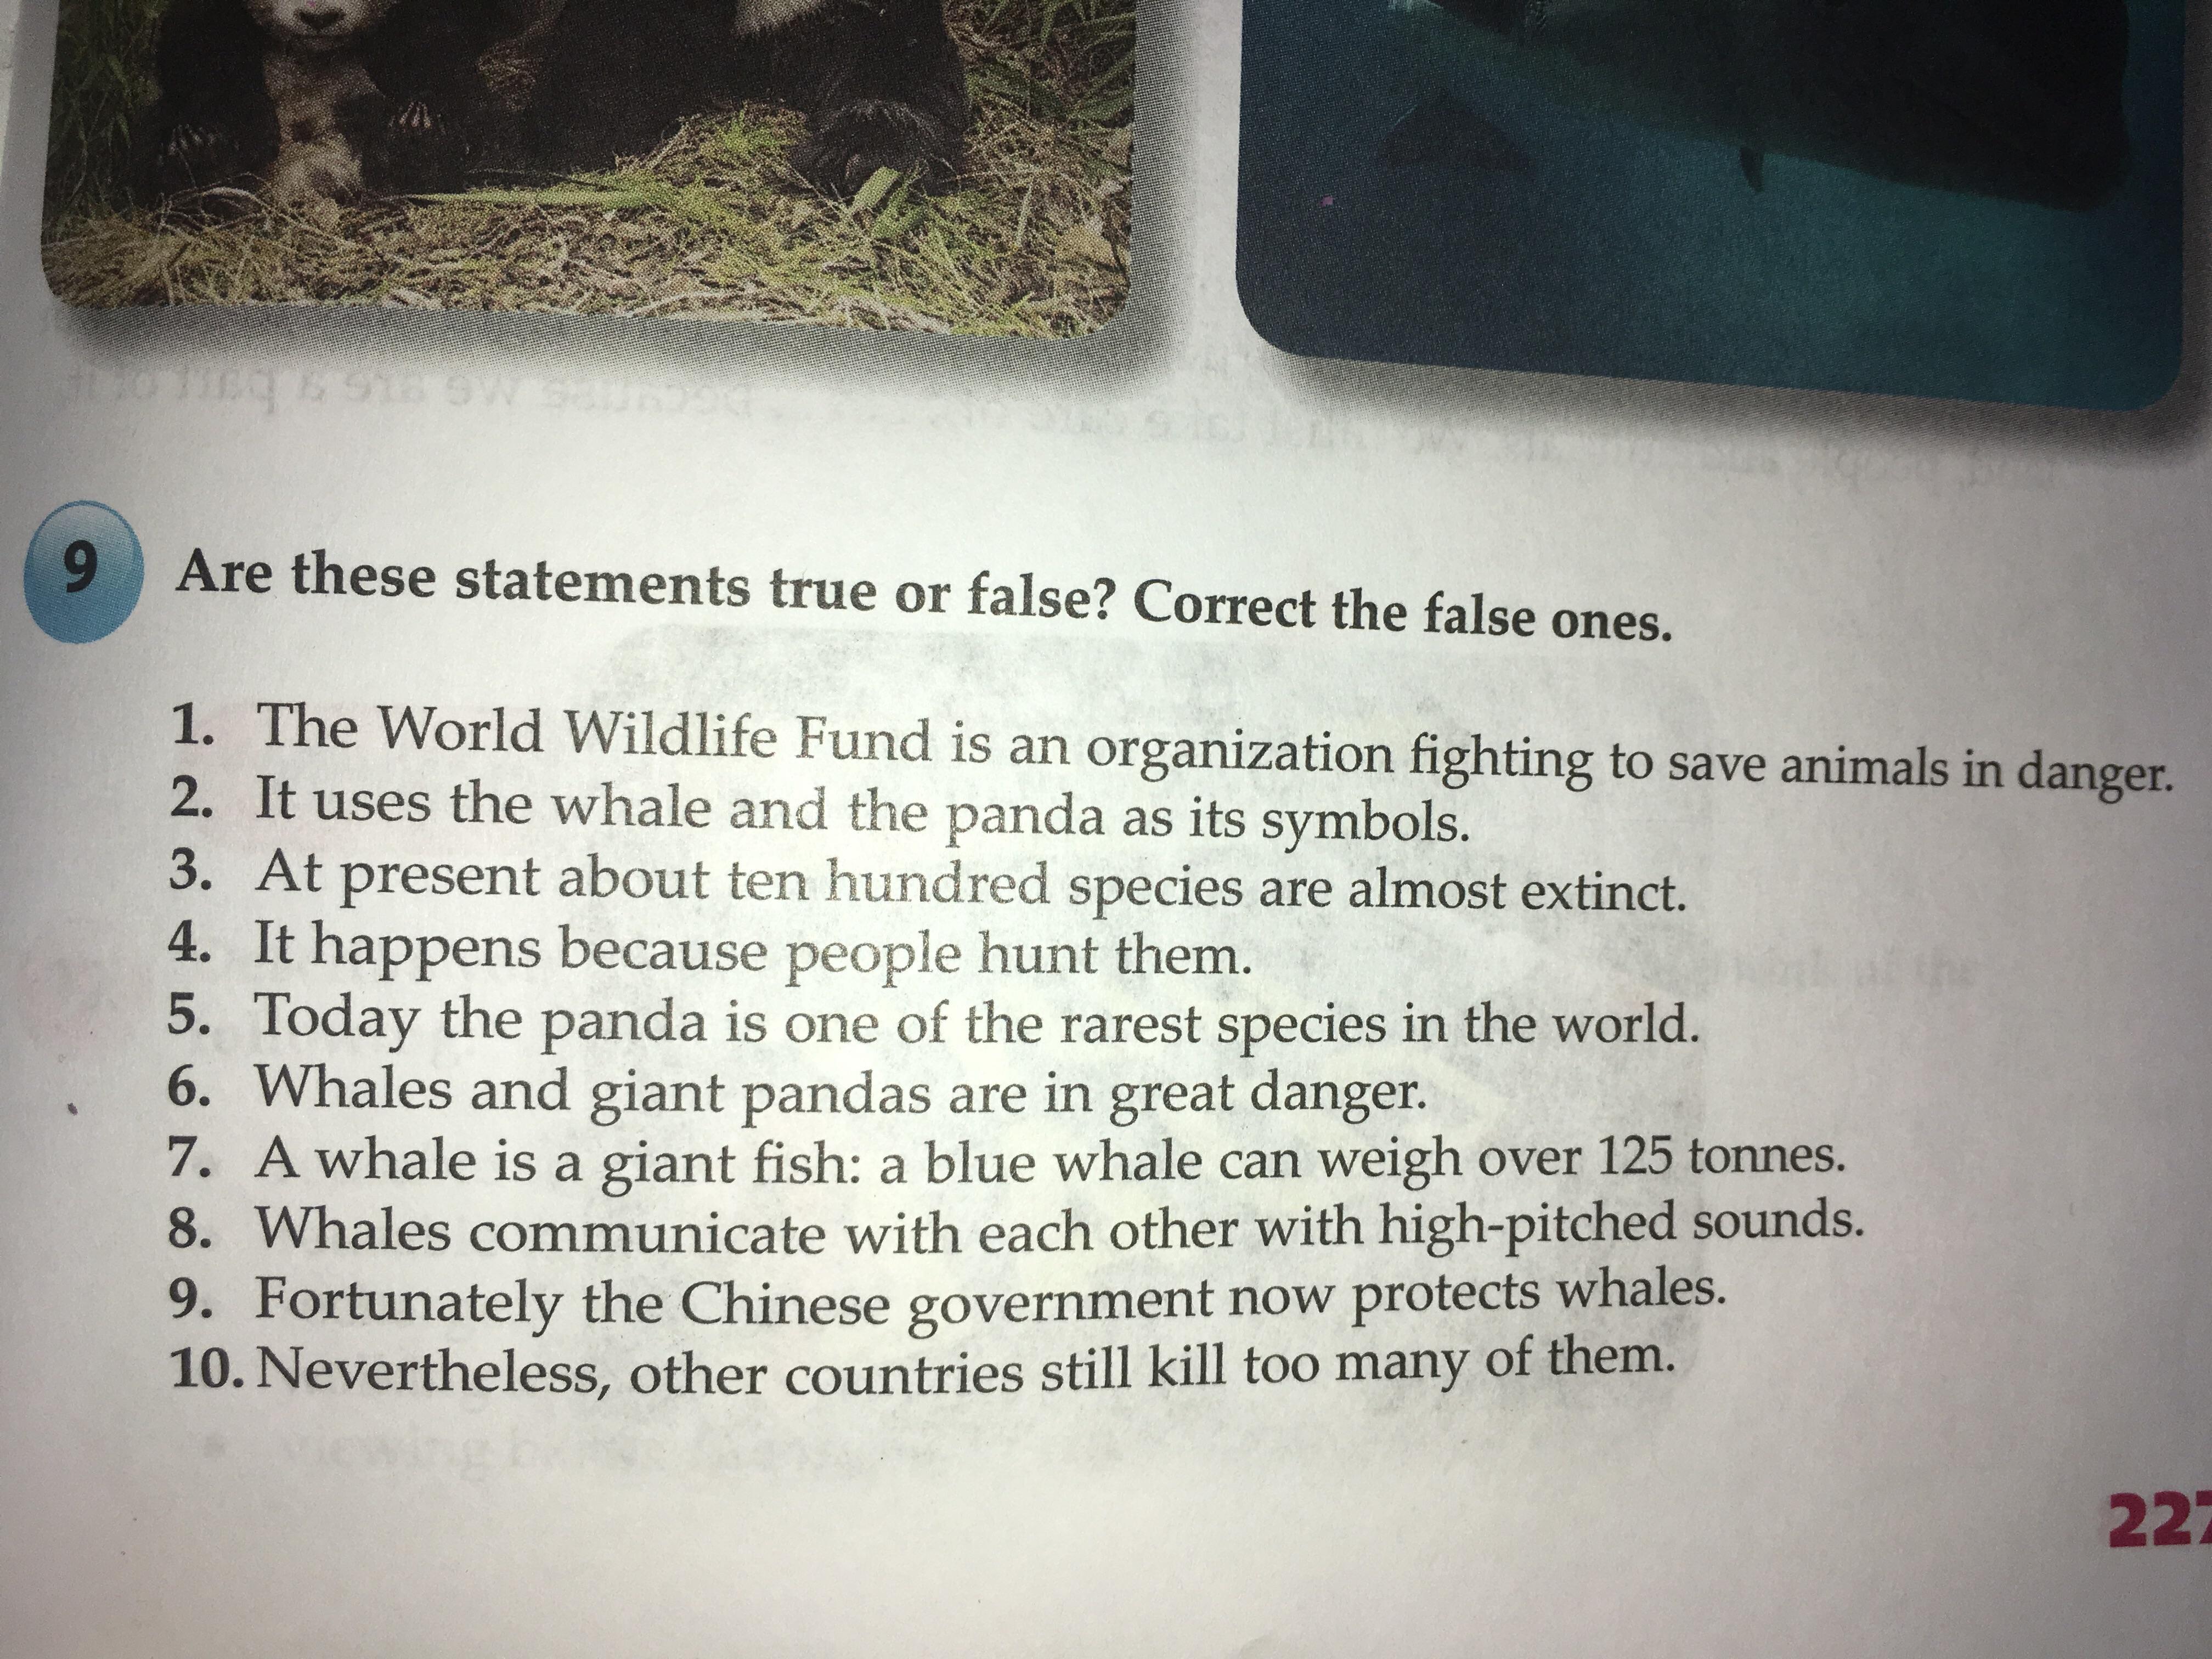 The world wildlife fund is. Are these Statements true or false correct the false ones ответы. The World Wildlife Fund is an Organization Fighting. Are these Statements true of false correct the false ones задания. Are these Statements true or false correct the false ones гдз по английскому языку.